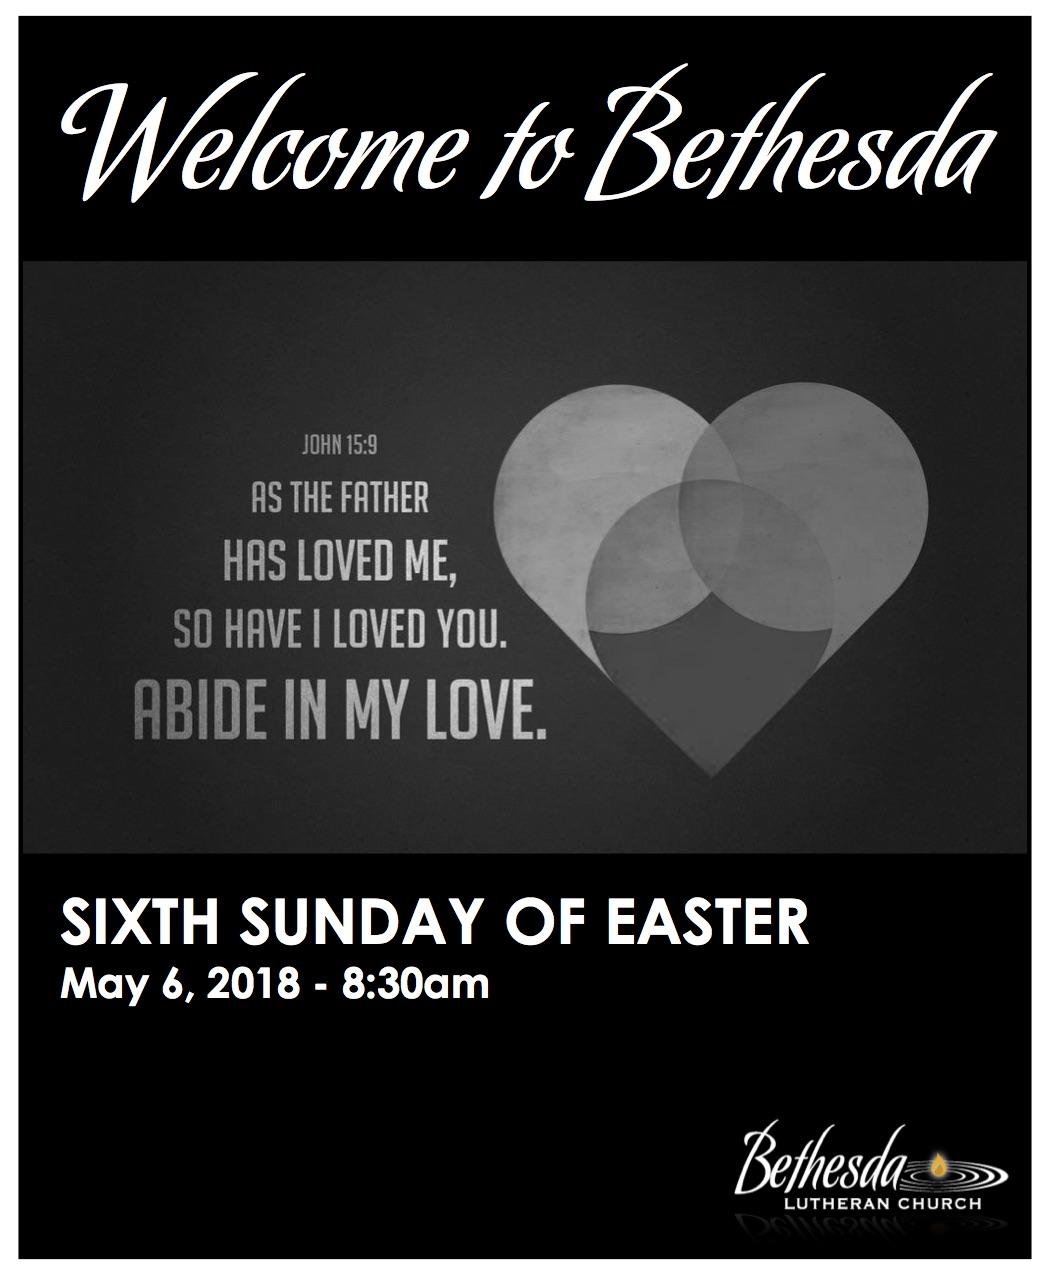 The Sixth Sunday of Easter 